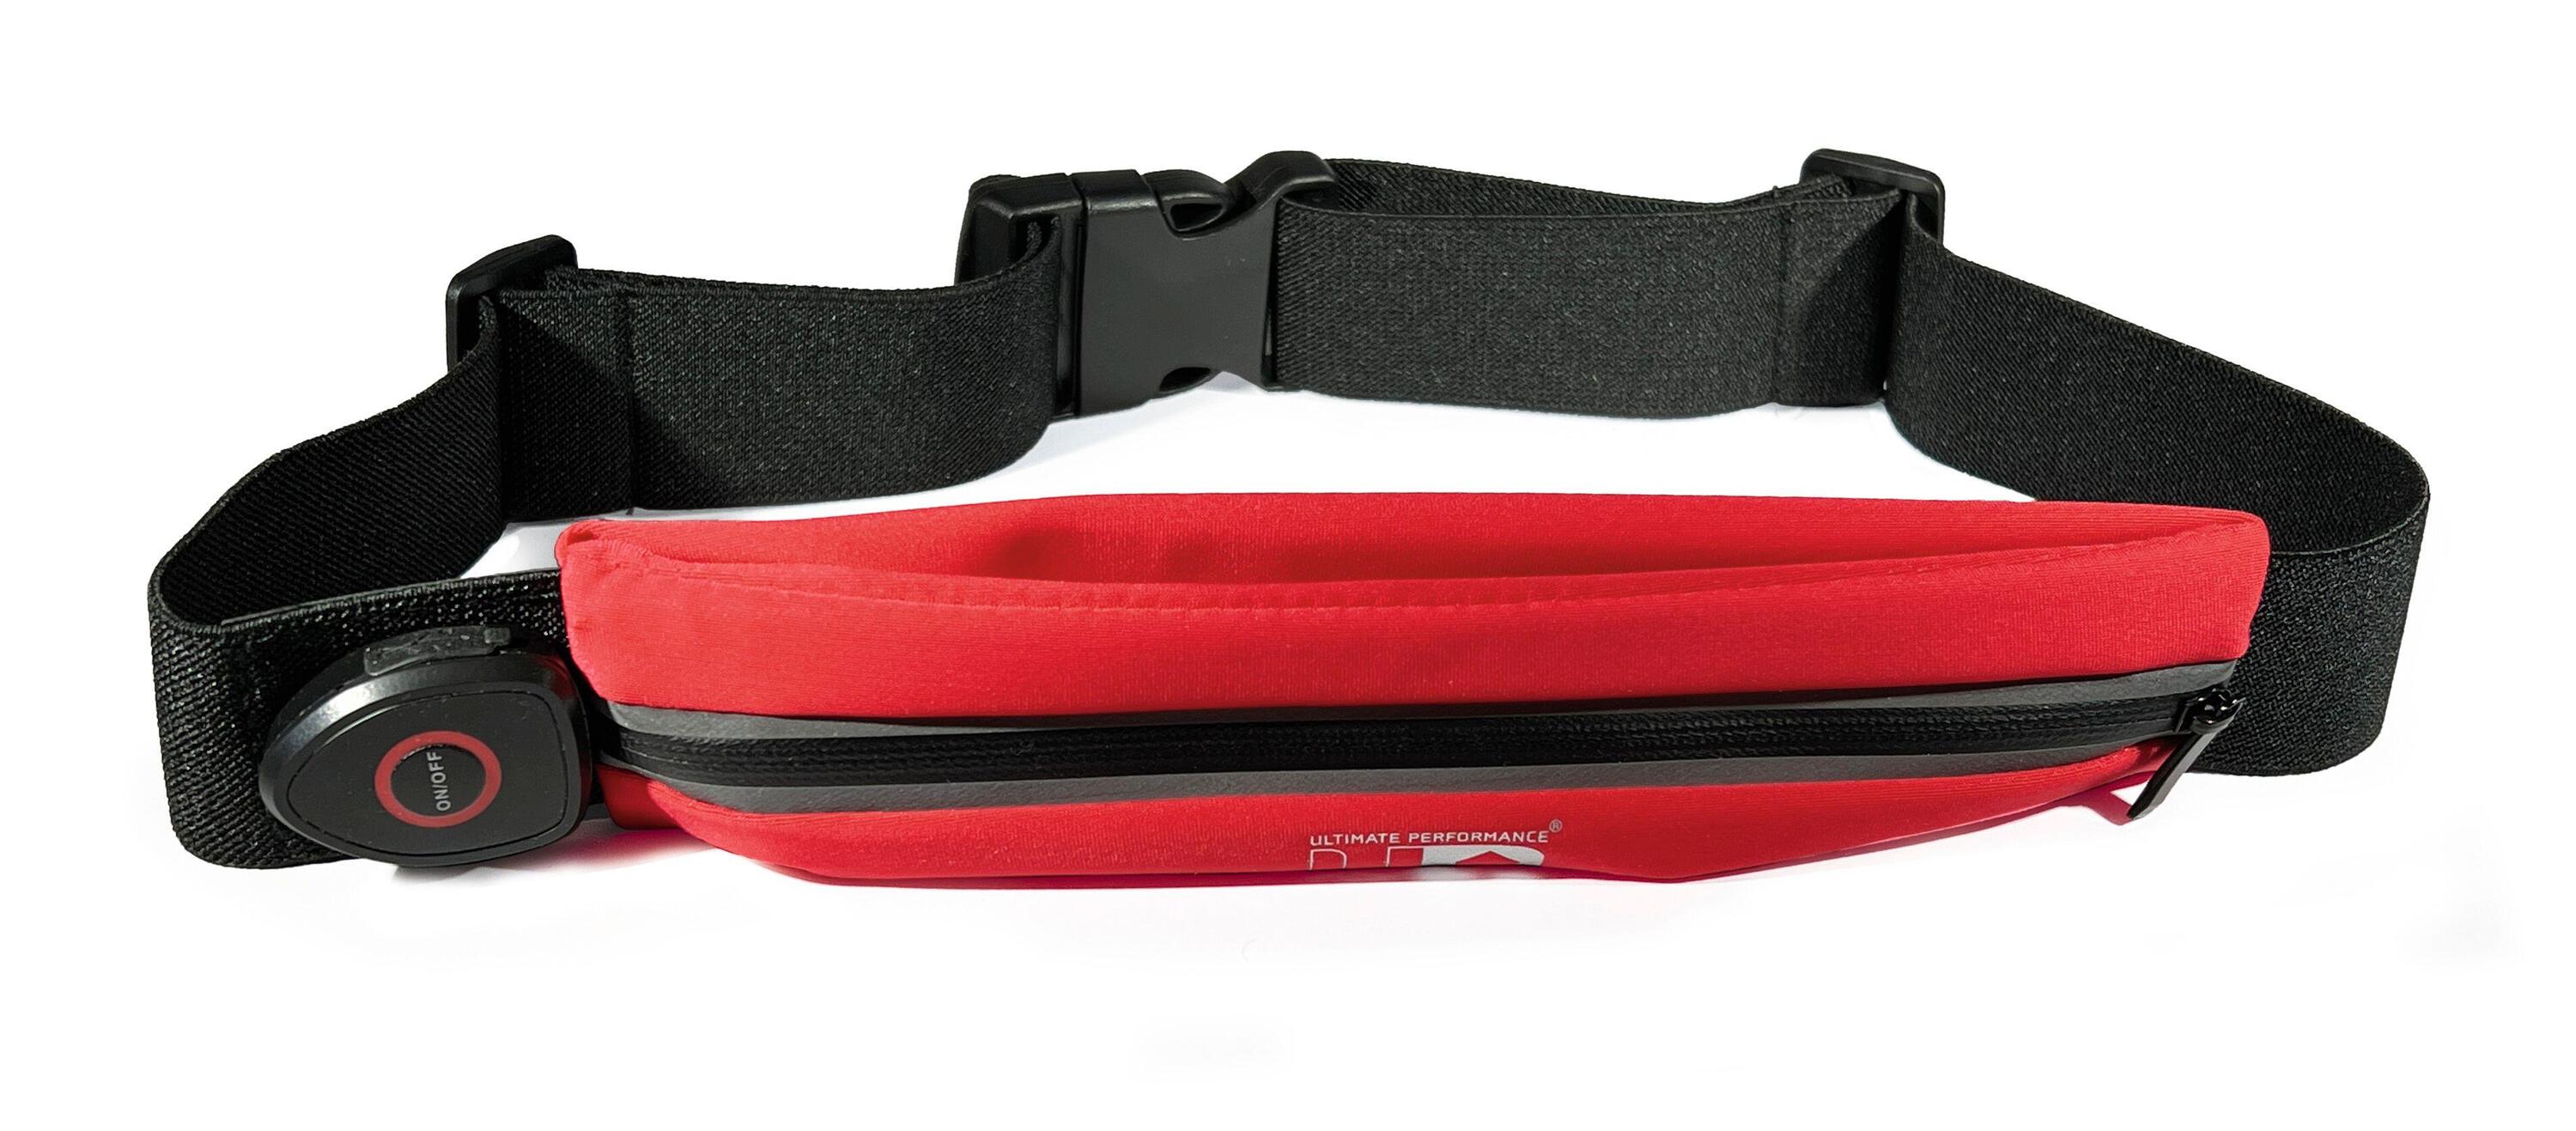 Ultimate Performance Ease LED Expandable Waistbag with Light 4/5